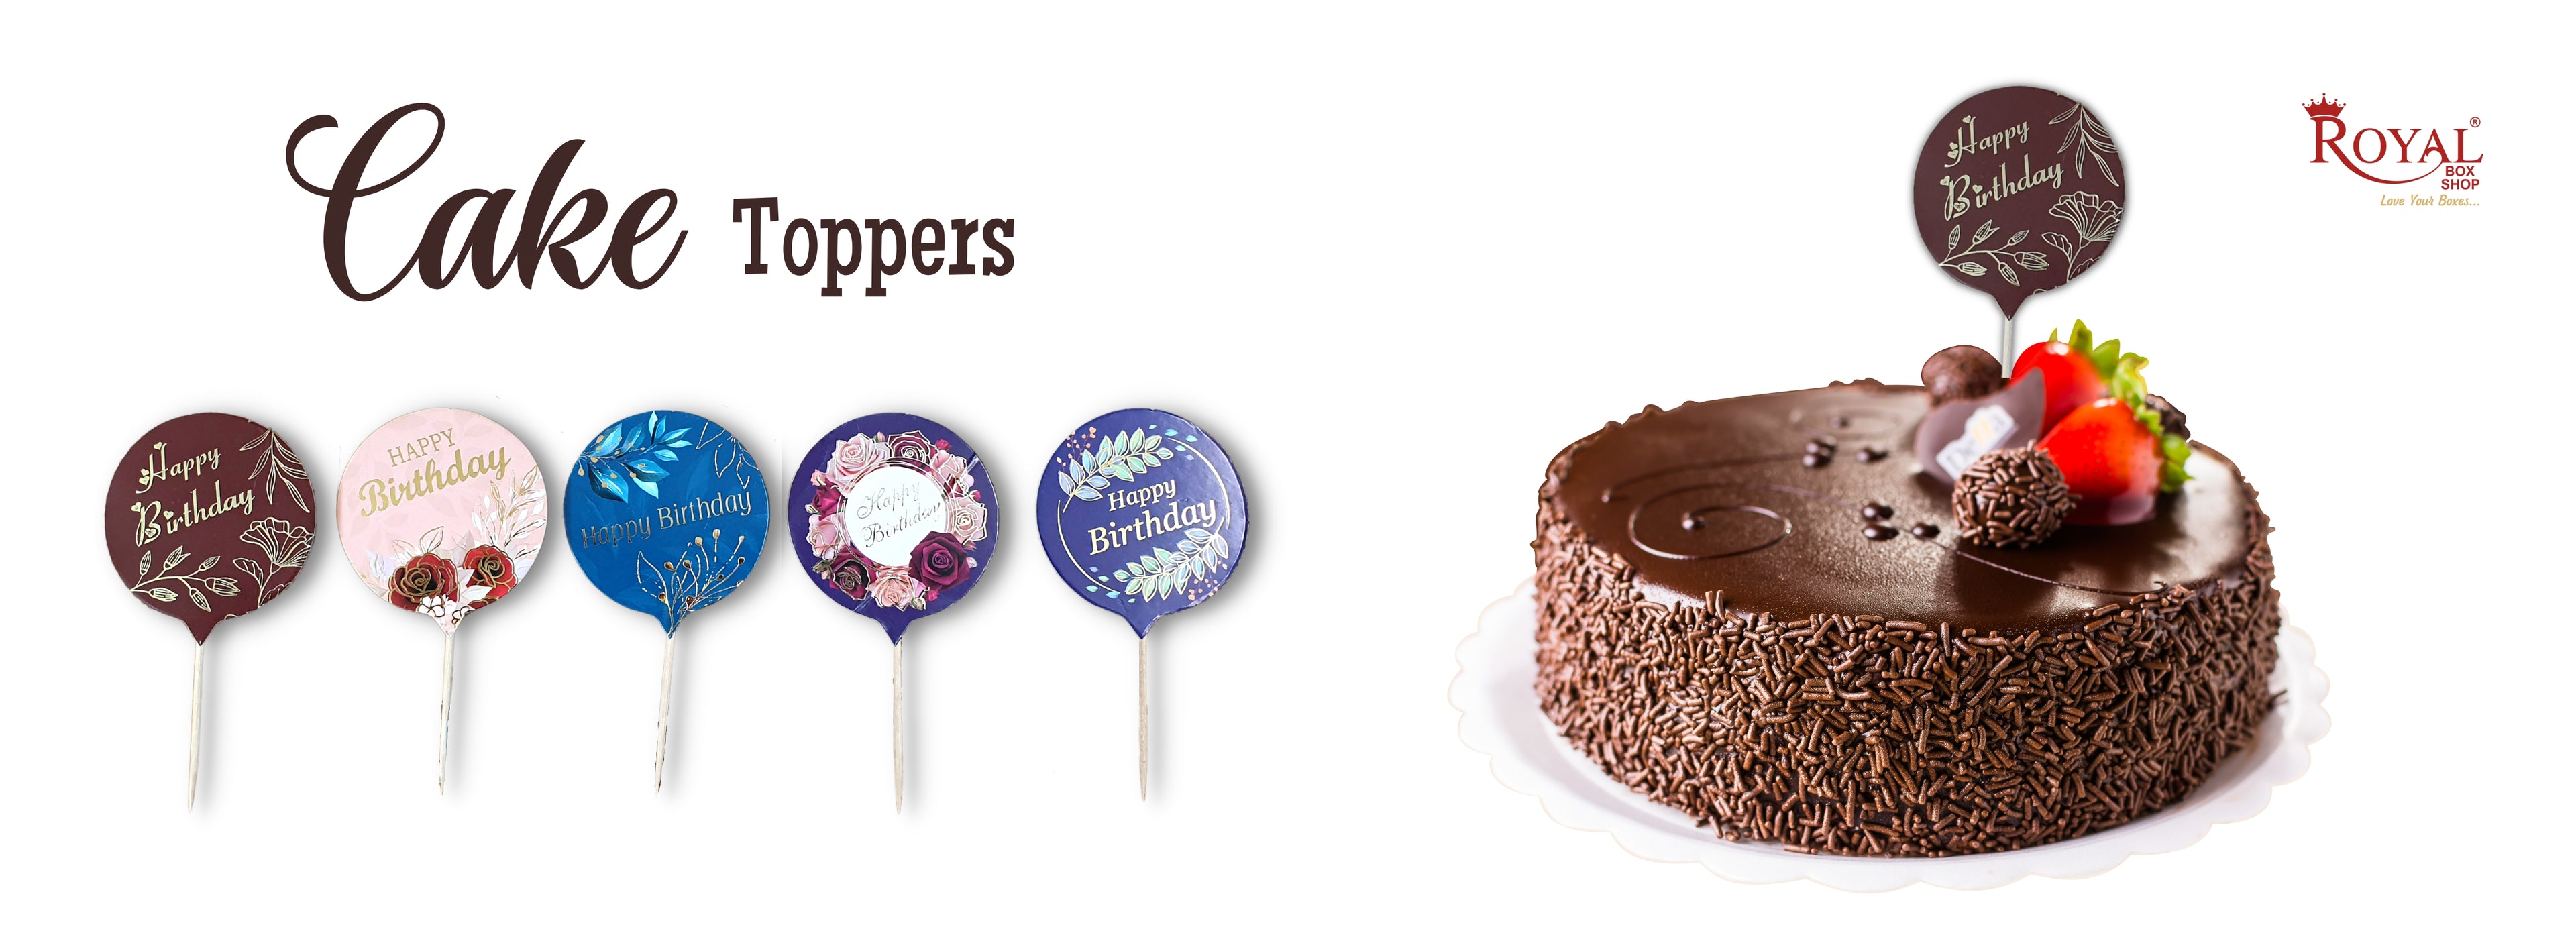 Cake Toppers and Tags @royalboxshop